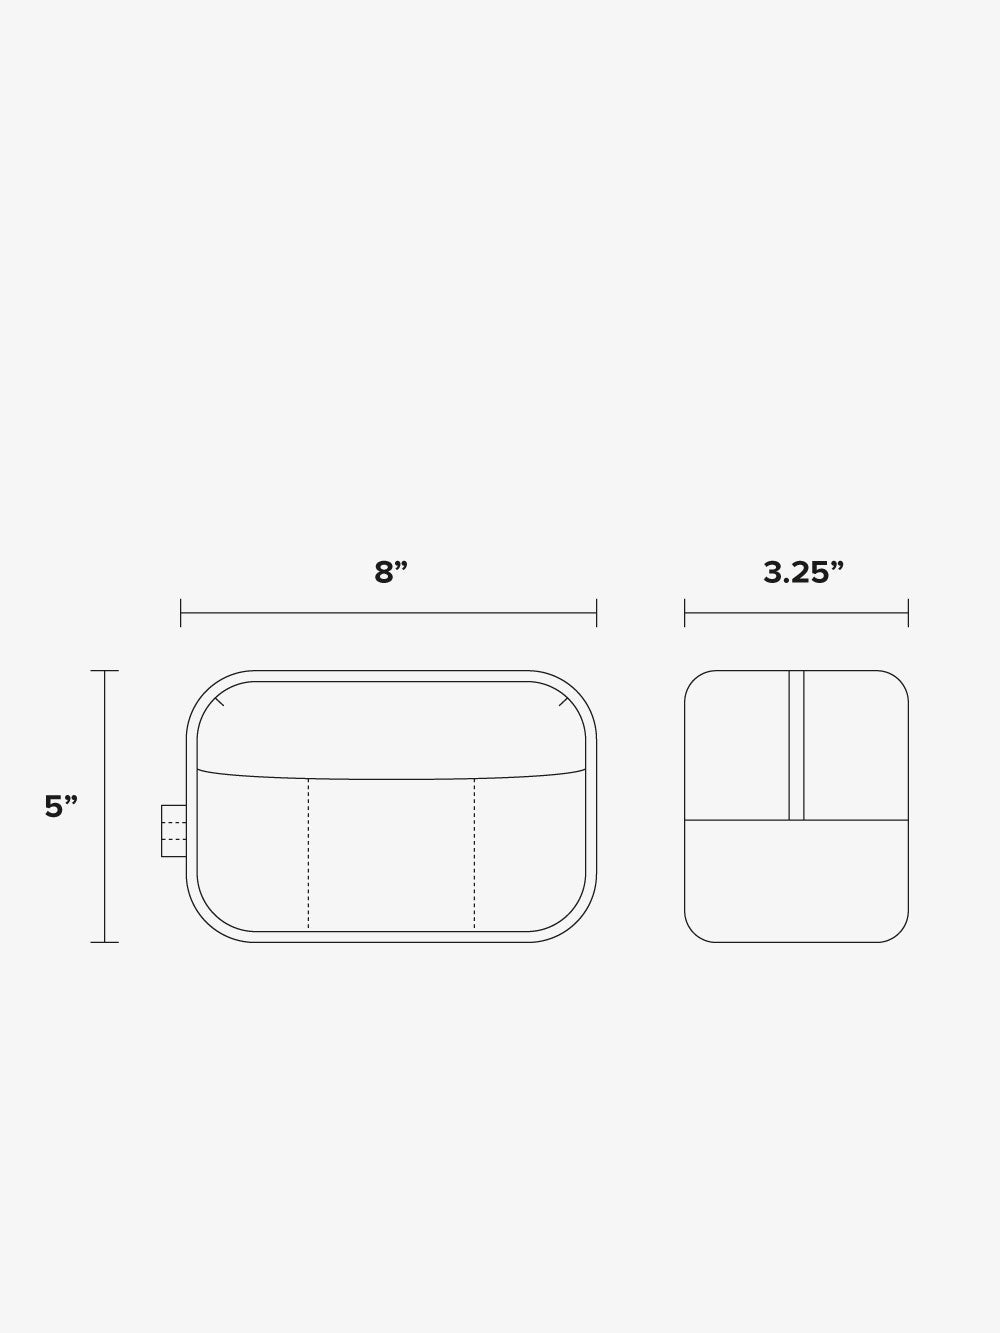 dimensions for Luka toiletry bag